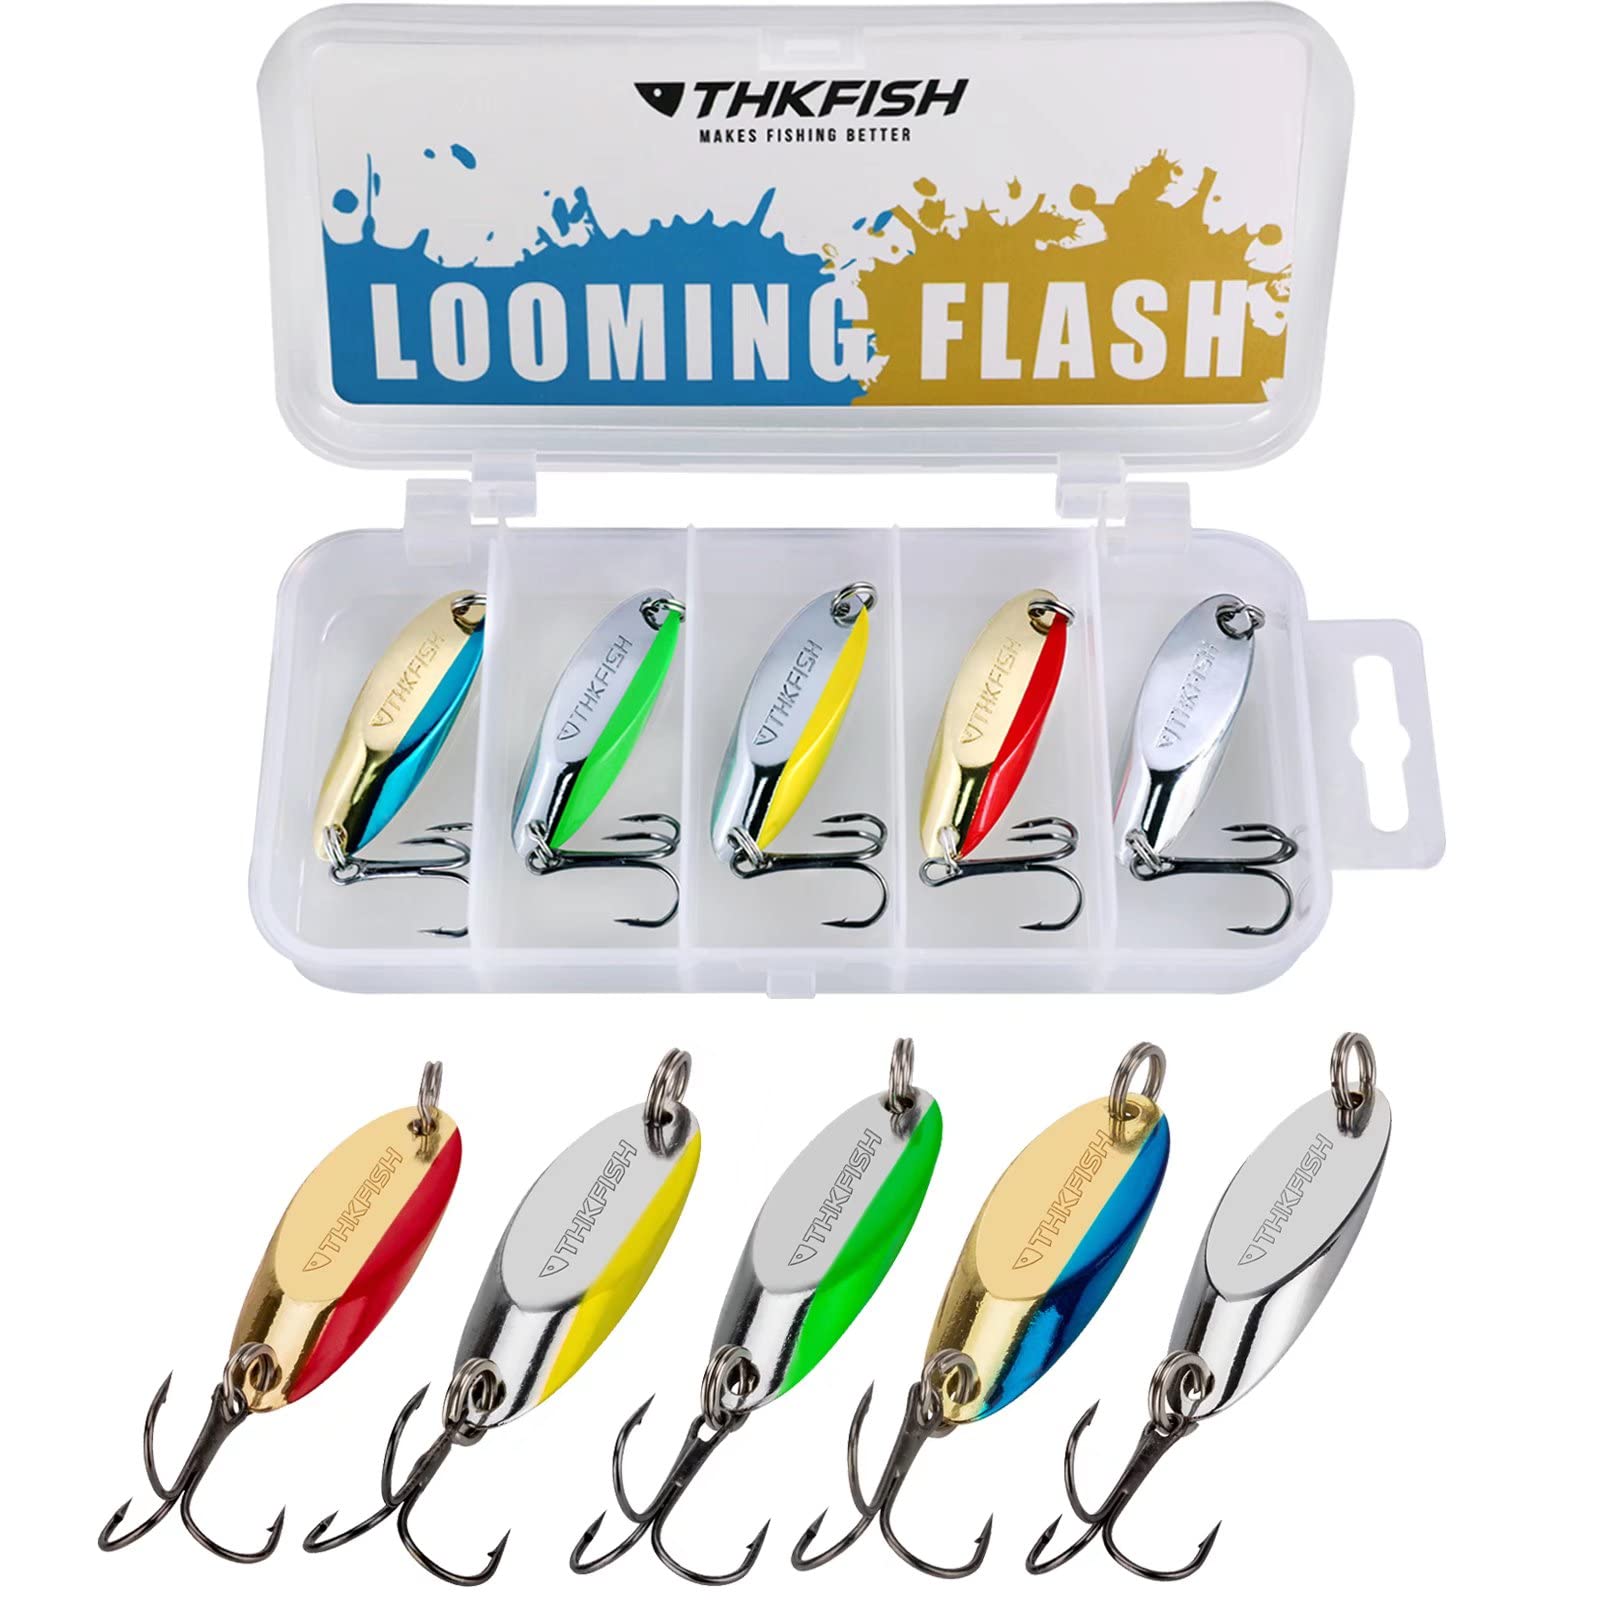 THKFISH Fishing Lures Trout Lures Fishing Spoons Lures for Trout Pike Bass  Crappie Walleye 1/8oz 1/5oz 1/4oz 3/8oz 1/2oz 3/4oz 5pcs Color B 1/4oz 5pcs